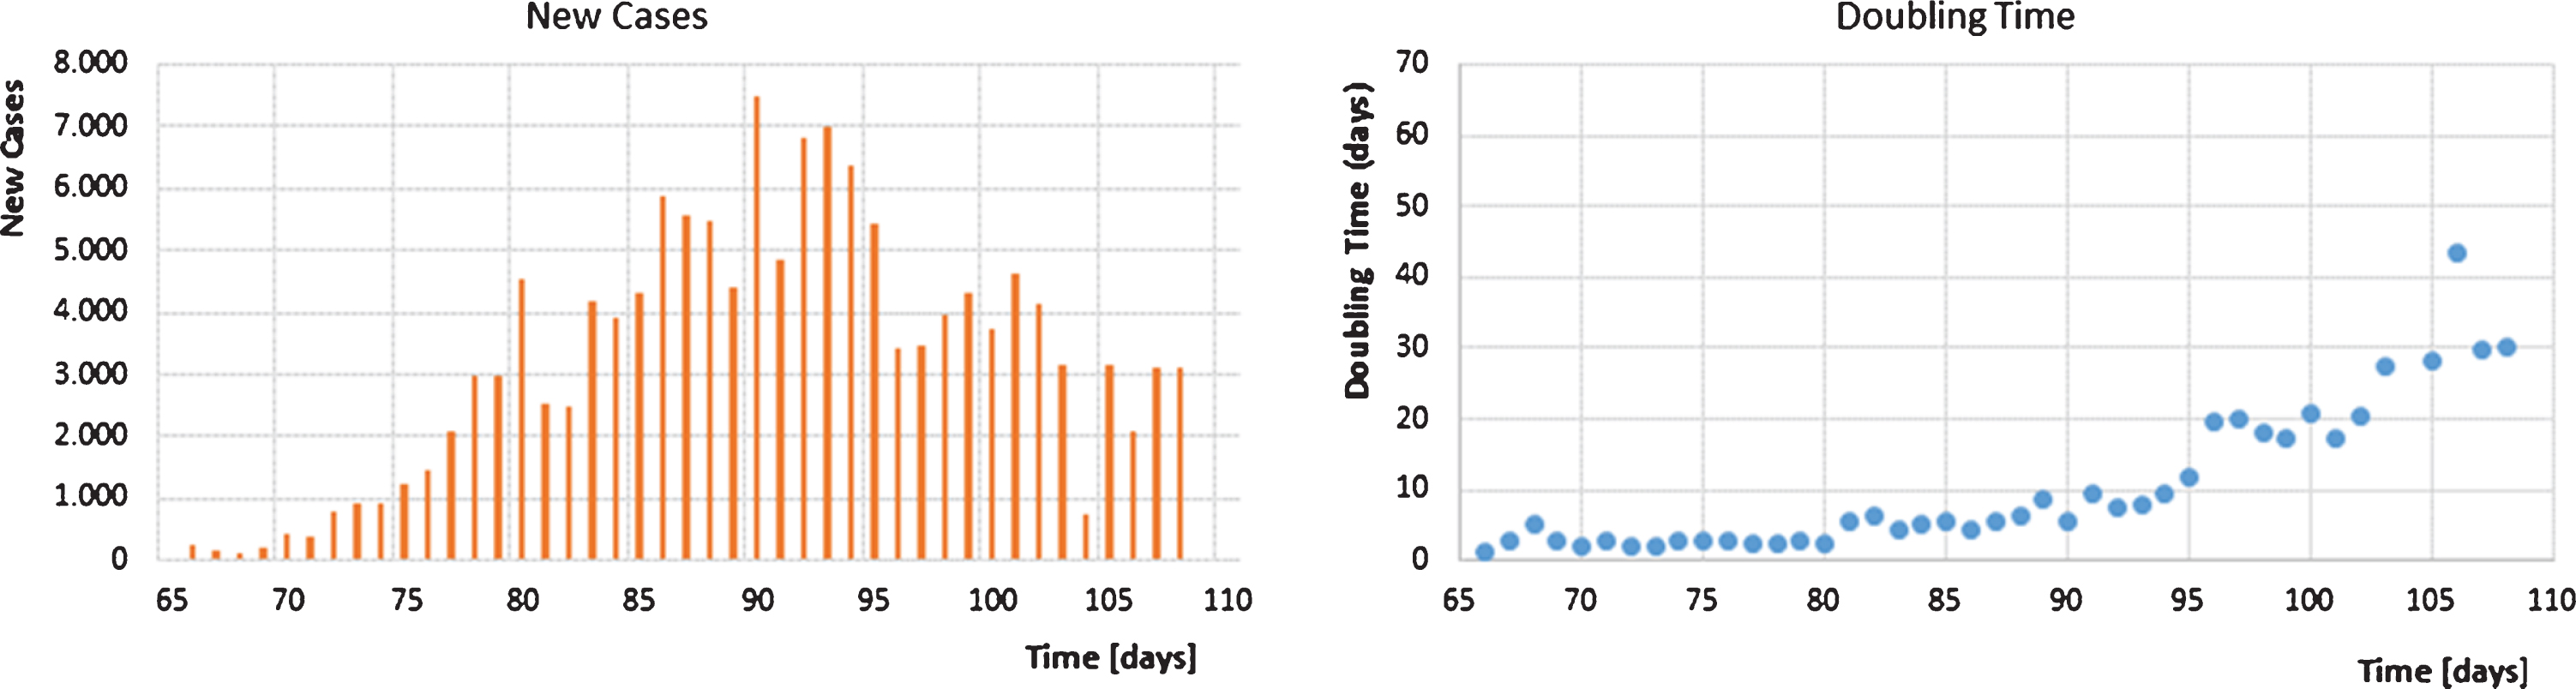 New cases and doubling time during SARS-CoV-2 outbreak in Germany until day 105 beginning at the 1st of January.